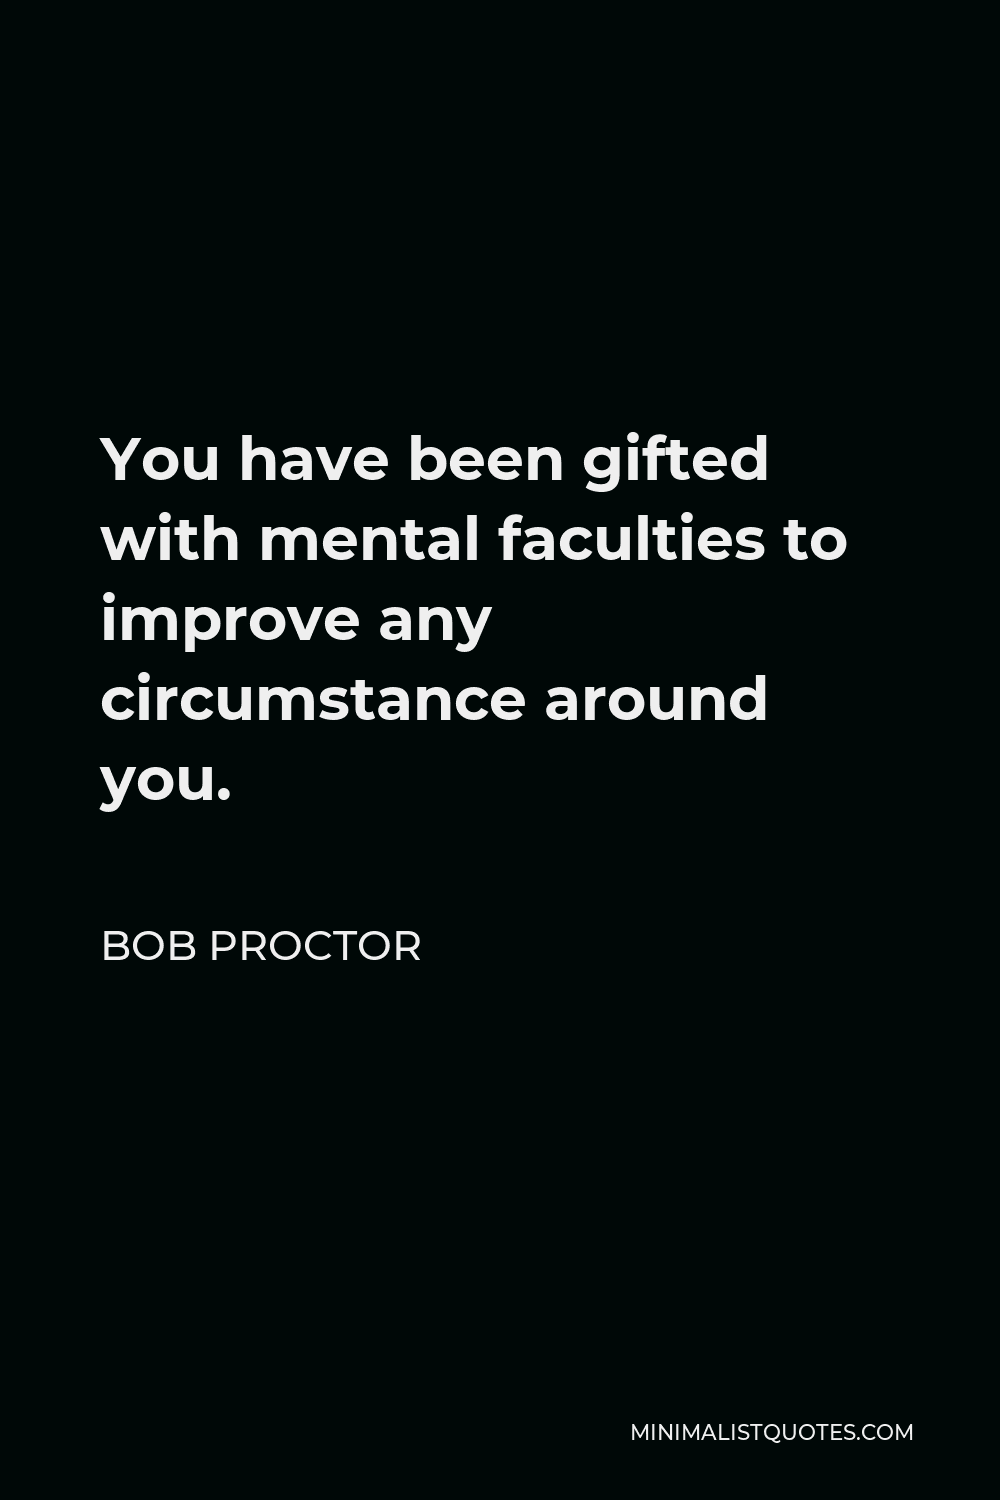 Bob Proctor Quote - You have been gifted with mental faculties to improve any circumstance around you.